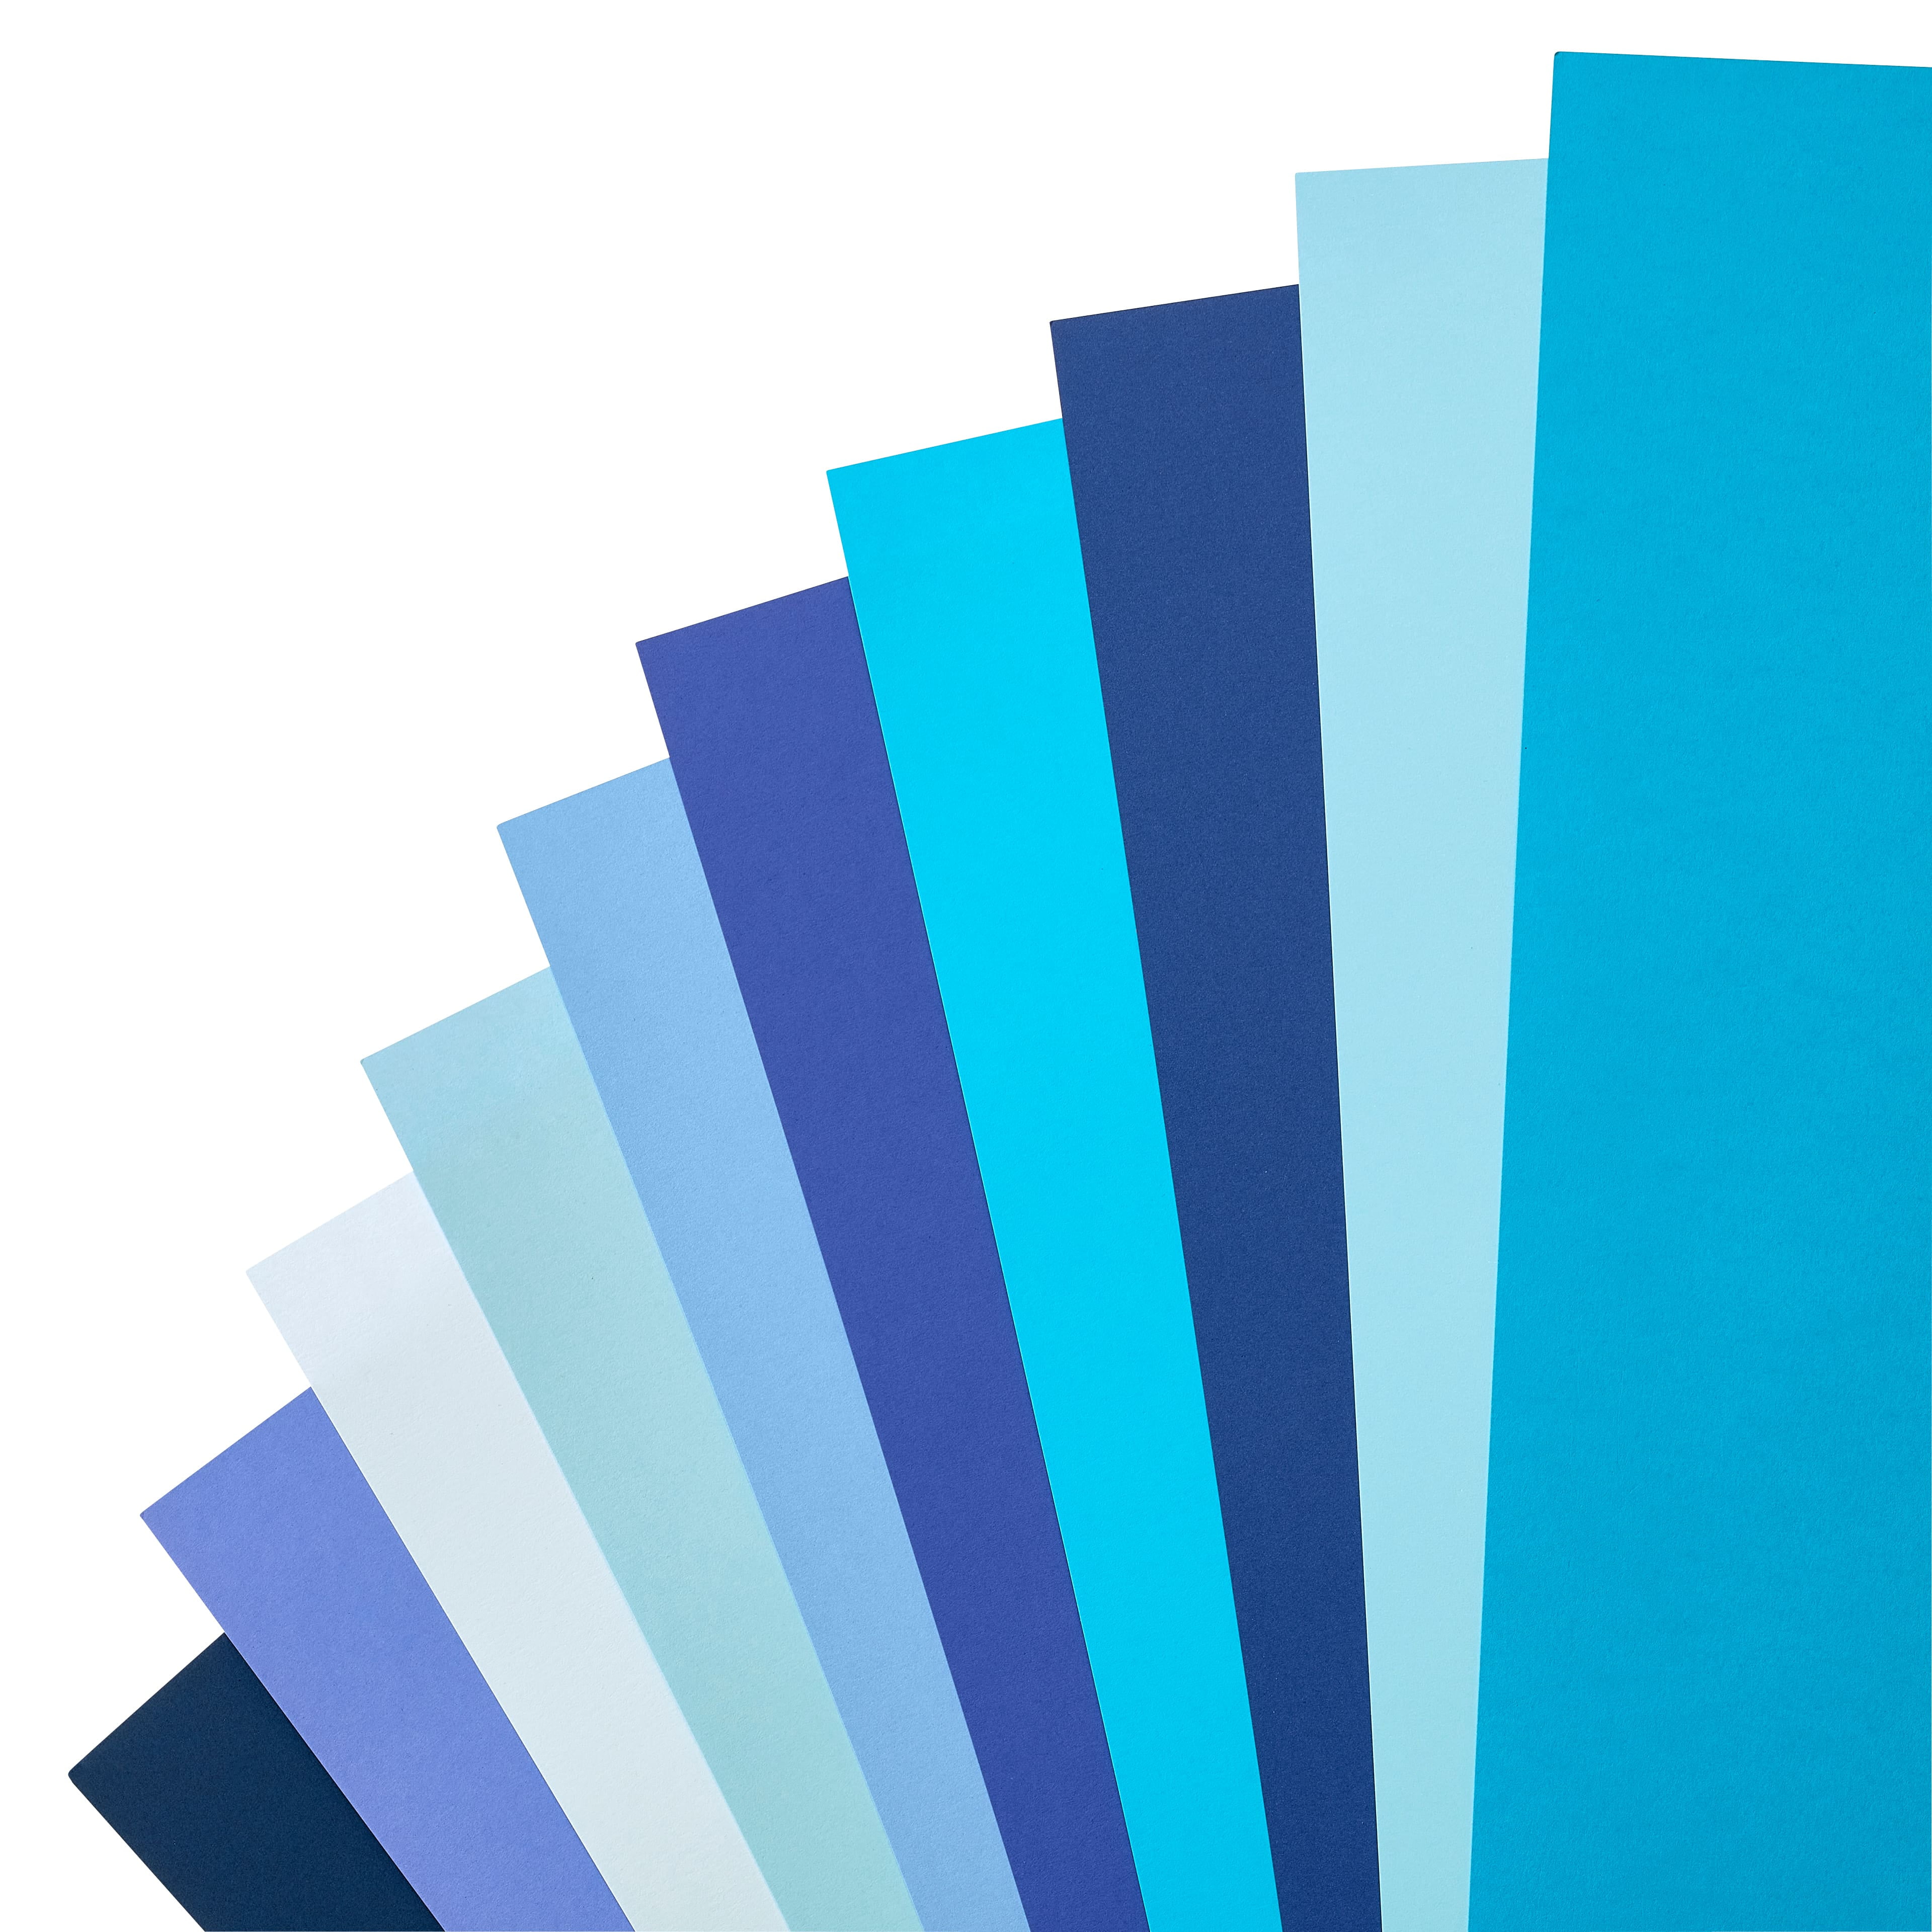 ARTIC BLUE 12x12 Smooth Light Blue Cardstock - Lessebo Colors